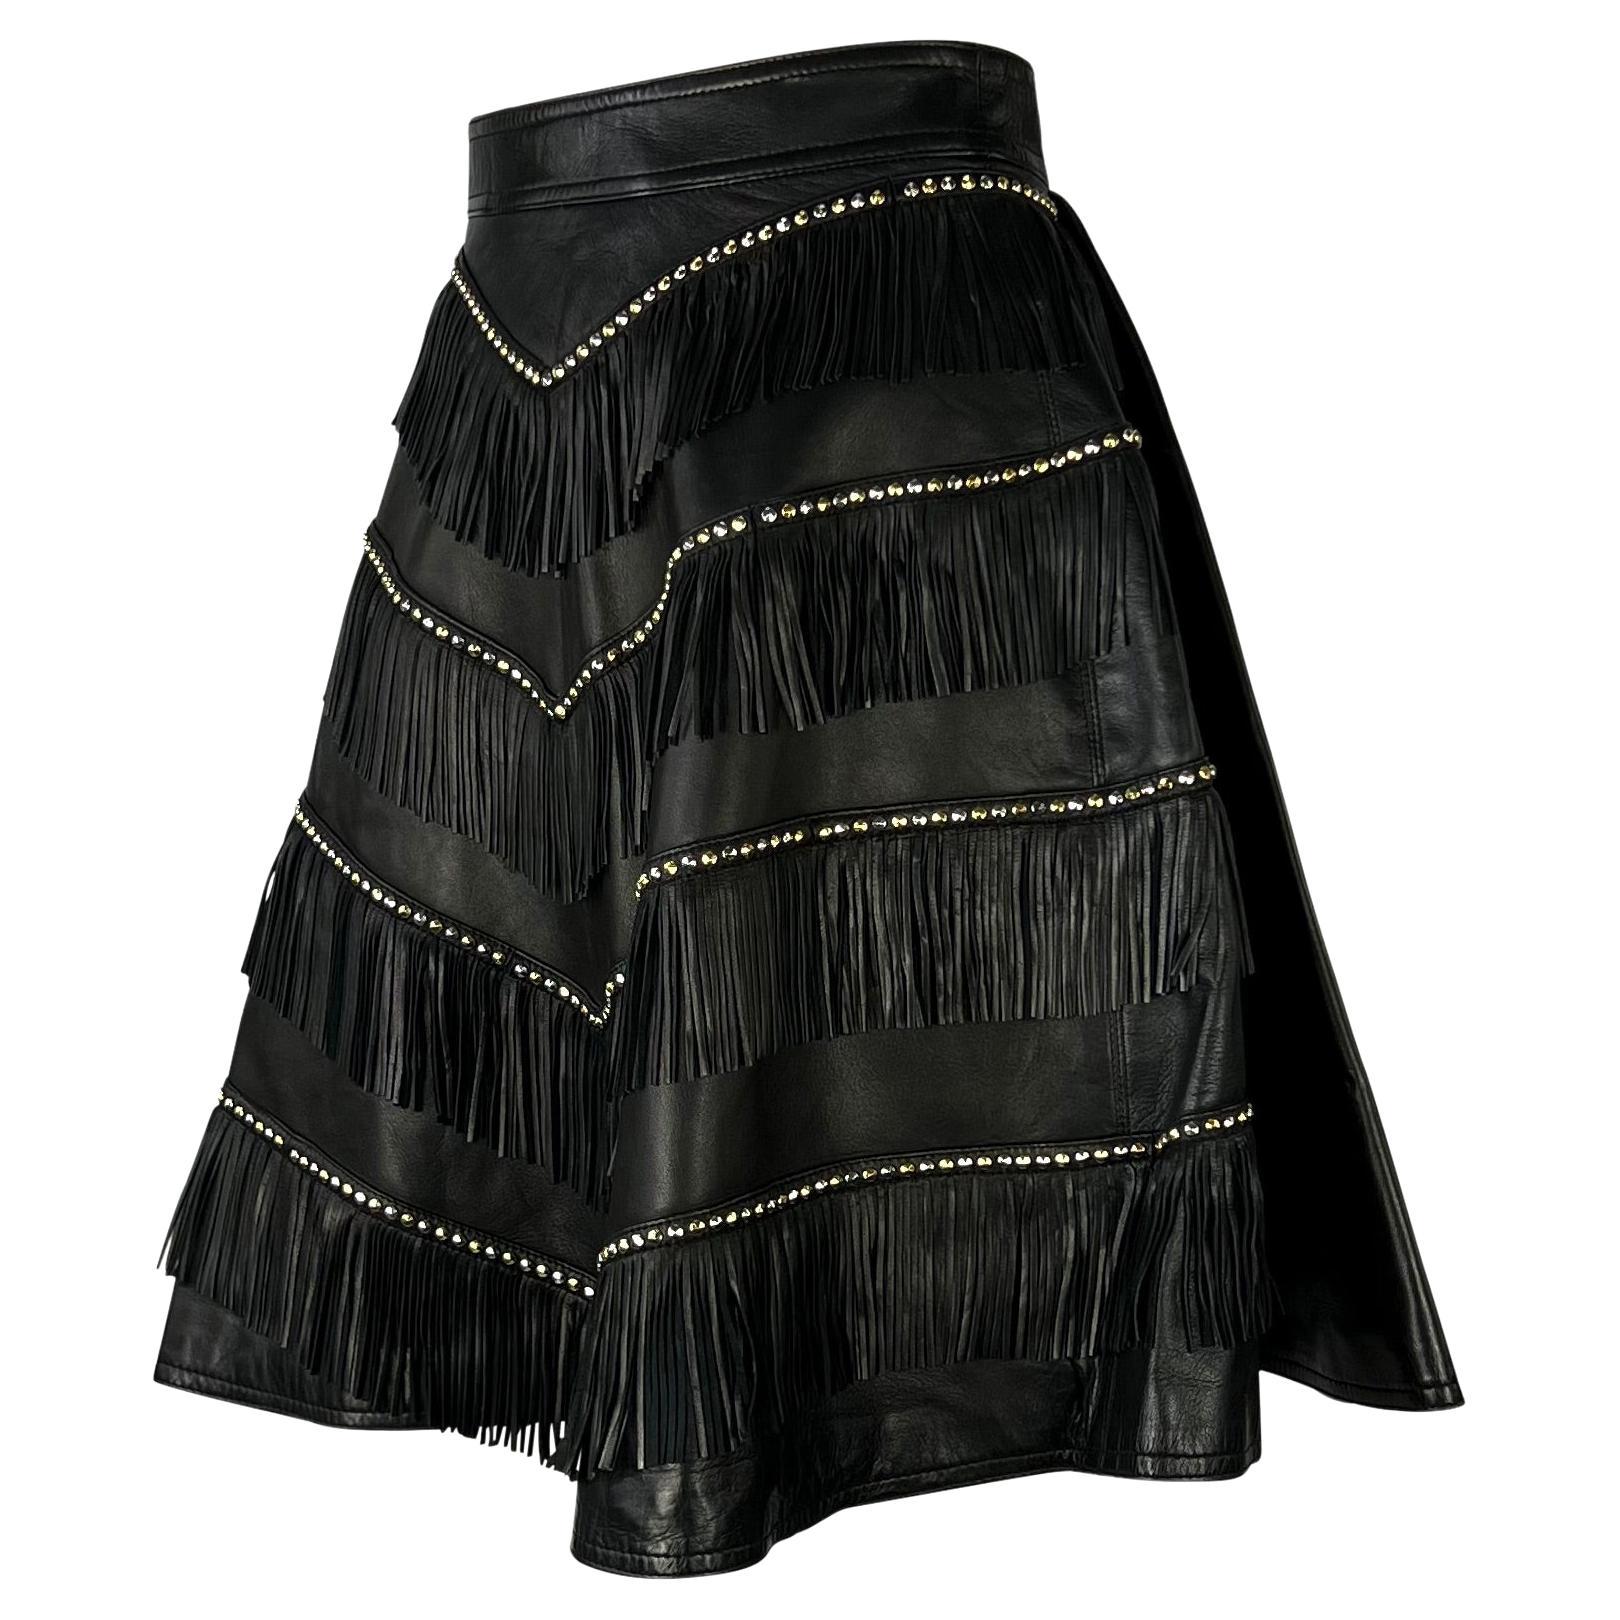 Presenting a studded leather A-line skirt designed by Gianni Versace for his infamous Fall/Winter 1992 'Miss S&M' bondage-inspired collection. Worn on the runway with the fringe and stud detailing on the back as part of look number 40, this piece is